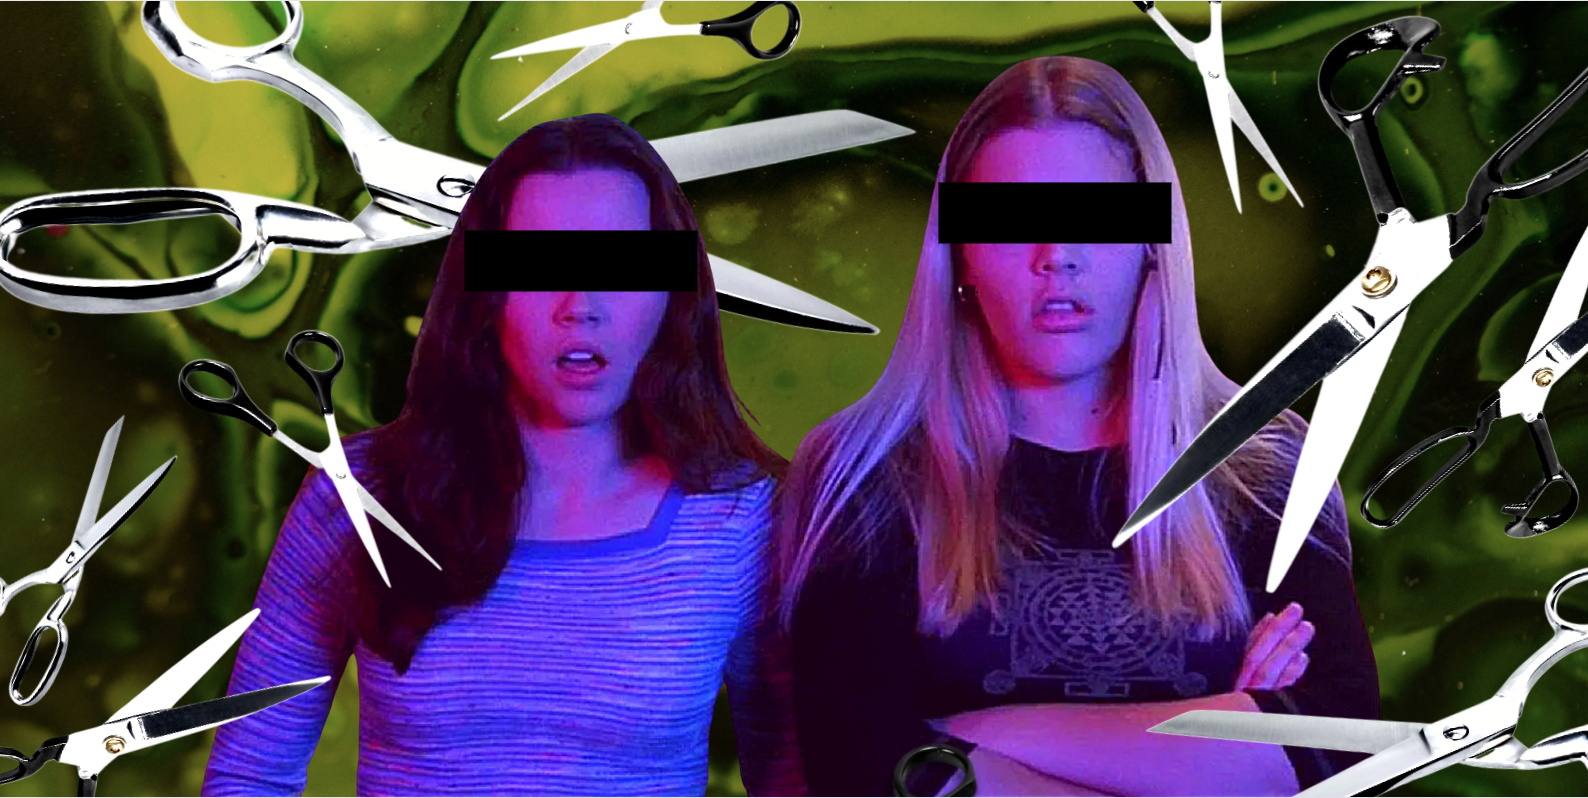 Kim and Lindsay from Freaks & Geeks stand with their mouths slightly open. Their eyes are covered by black bars. Behind them are a bunch of scissors and green toxic sludge.